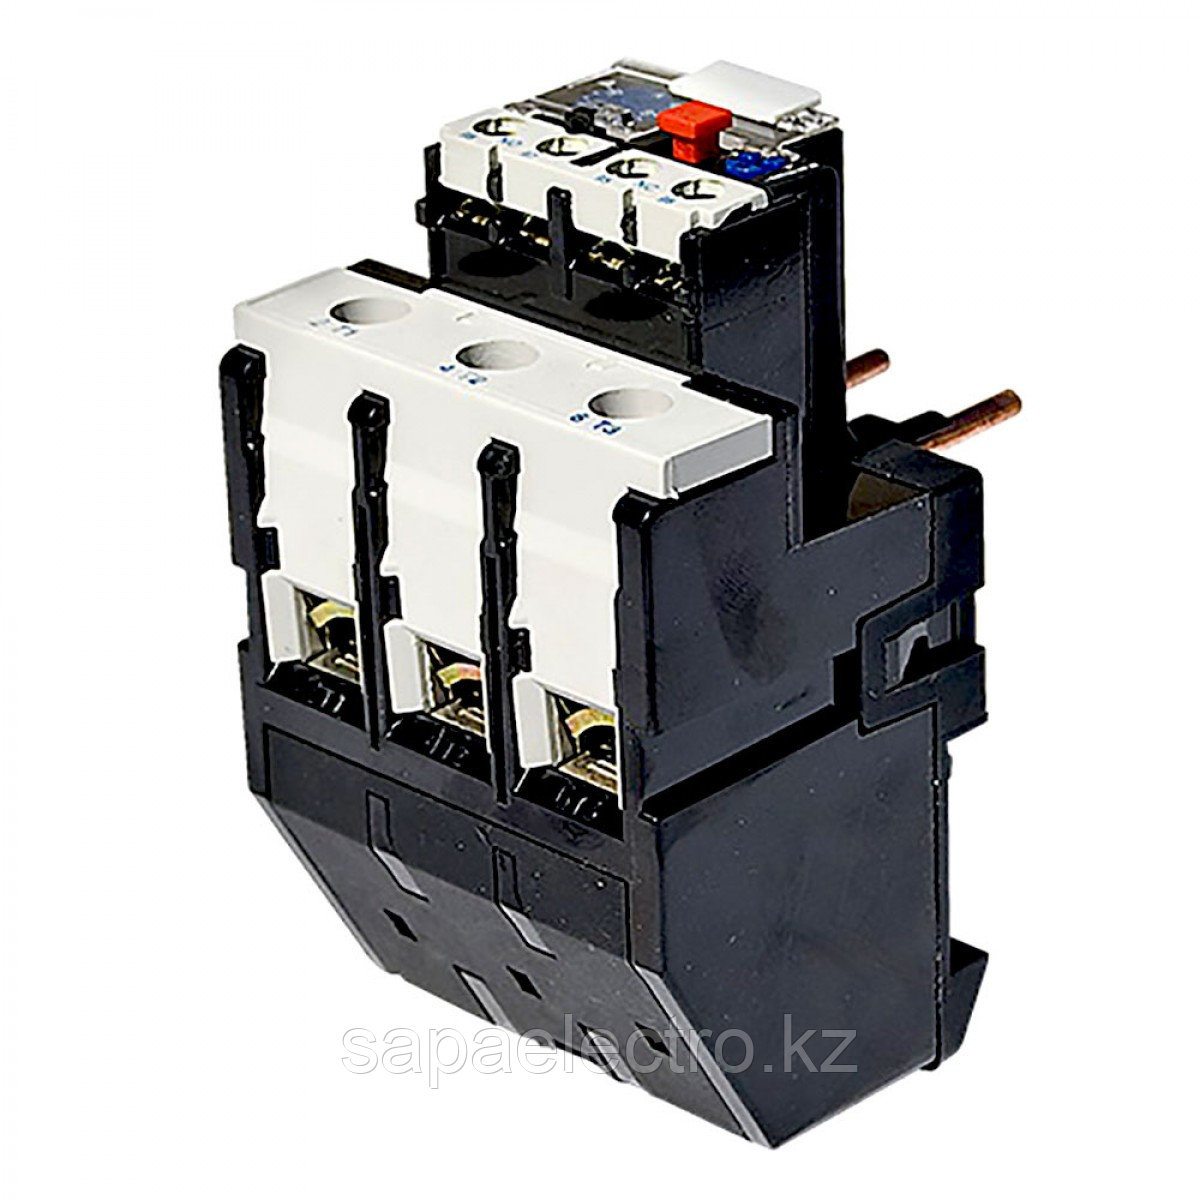 THERMAL RELAY  LR2-3363    63-80A   (TS)